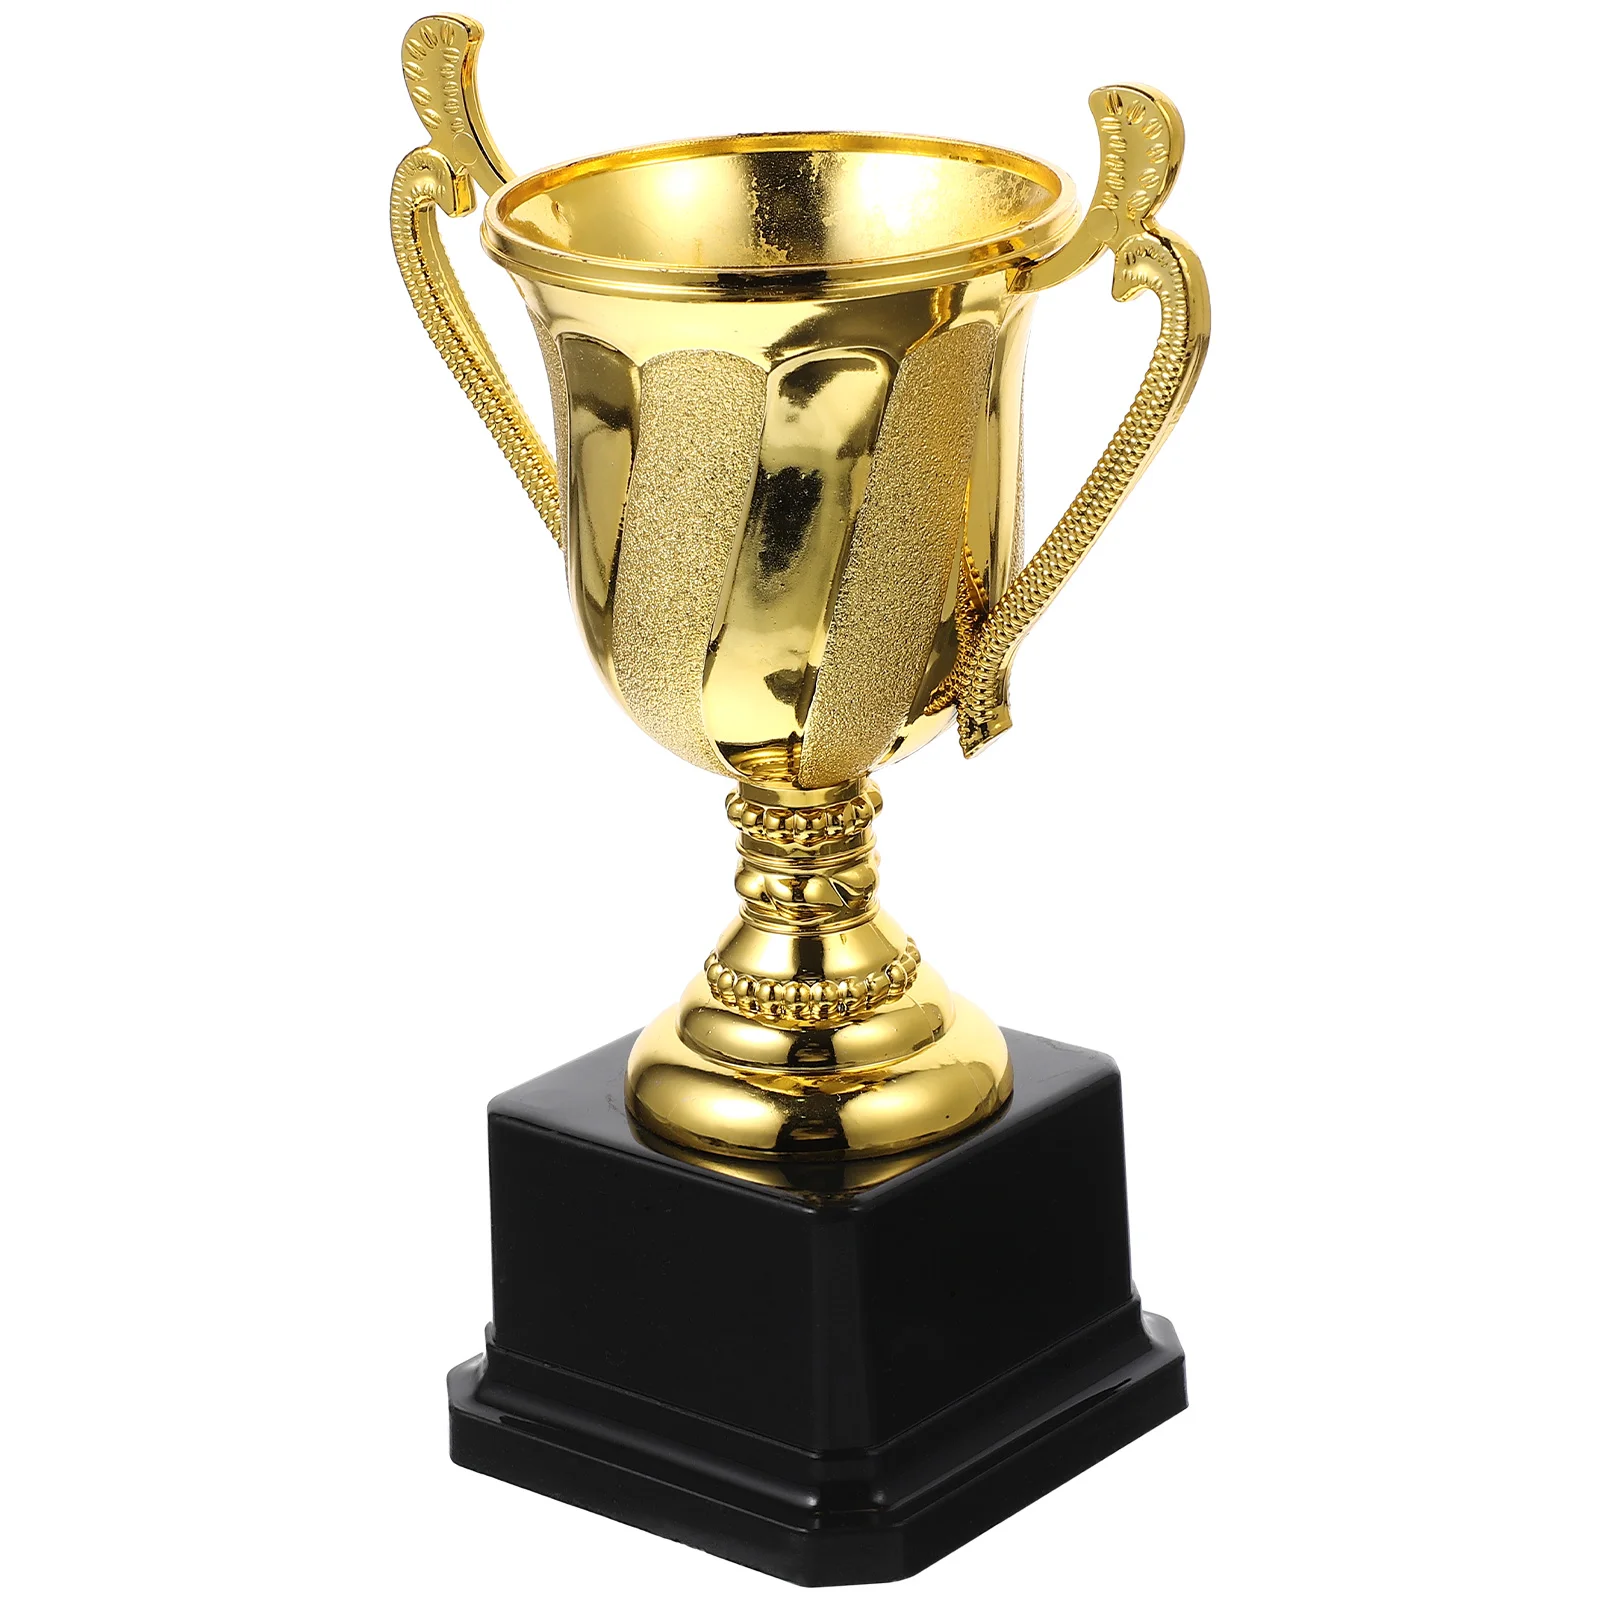 

Children's Competition Trophy Chic Prize Prizes Kids Award Gold Trophies Prop Plastic Sports